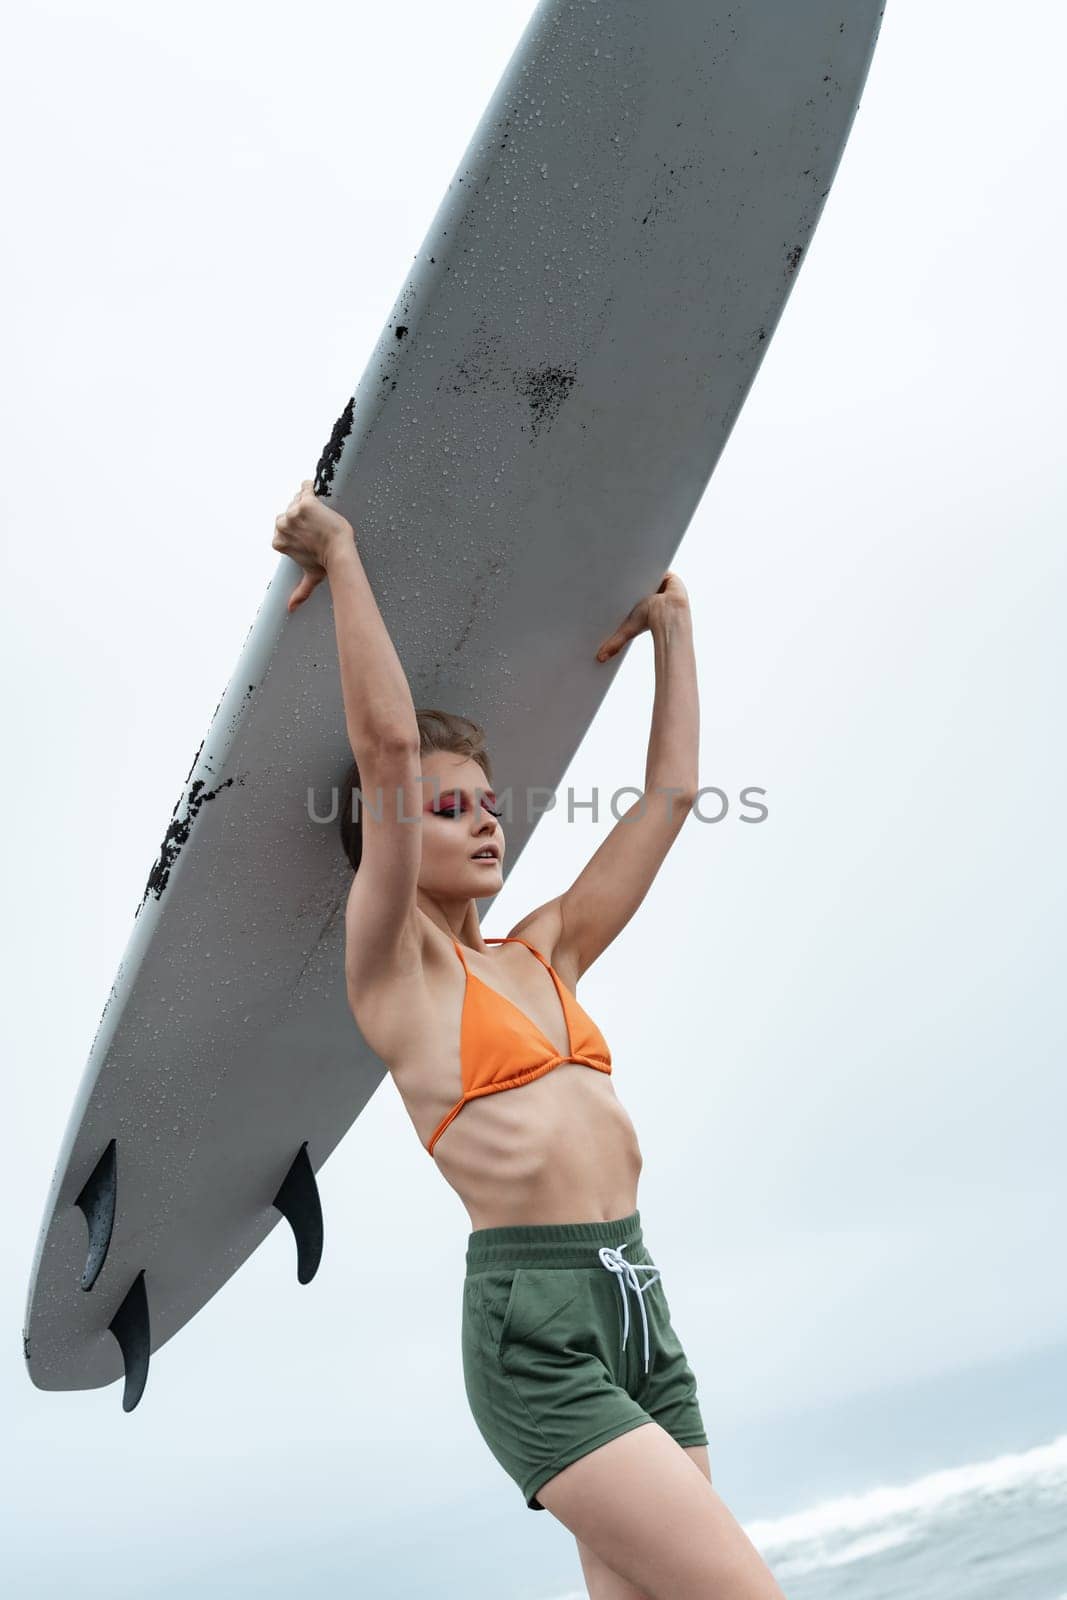 Sexuality female surfer carrying white surfboard on head during sports training. Beauty athletic woman in bikini top, shorts. Close-up Dutch angle view, low angle shot. Concepts of sport activities